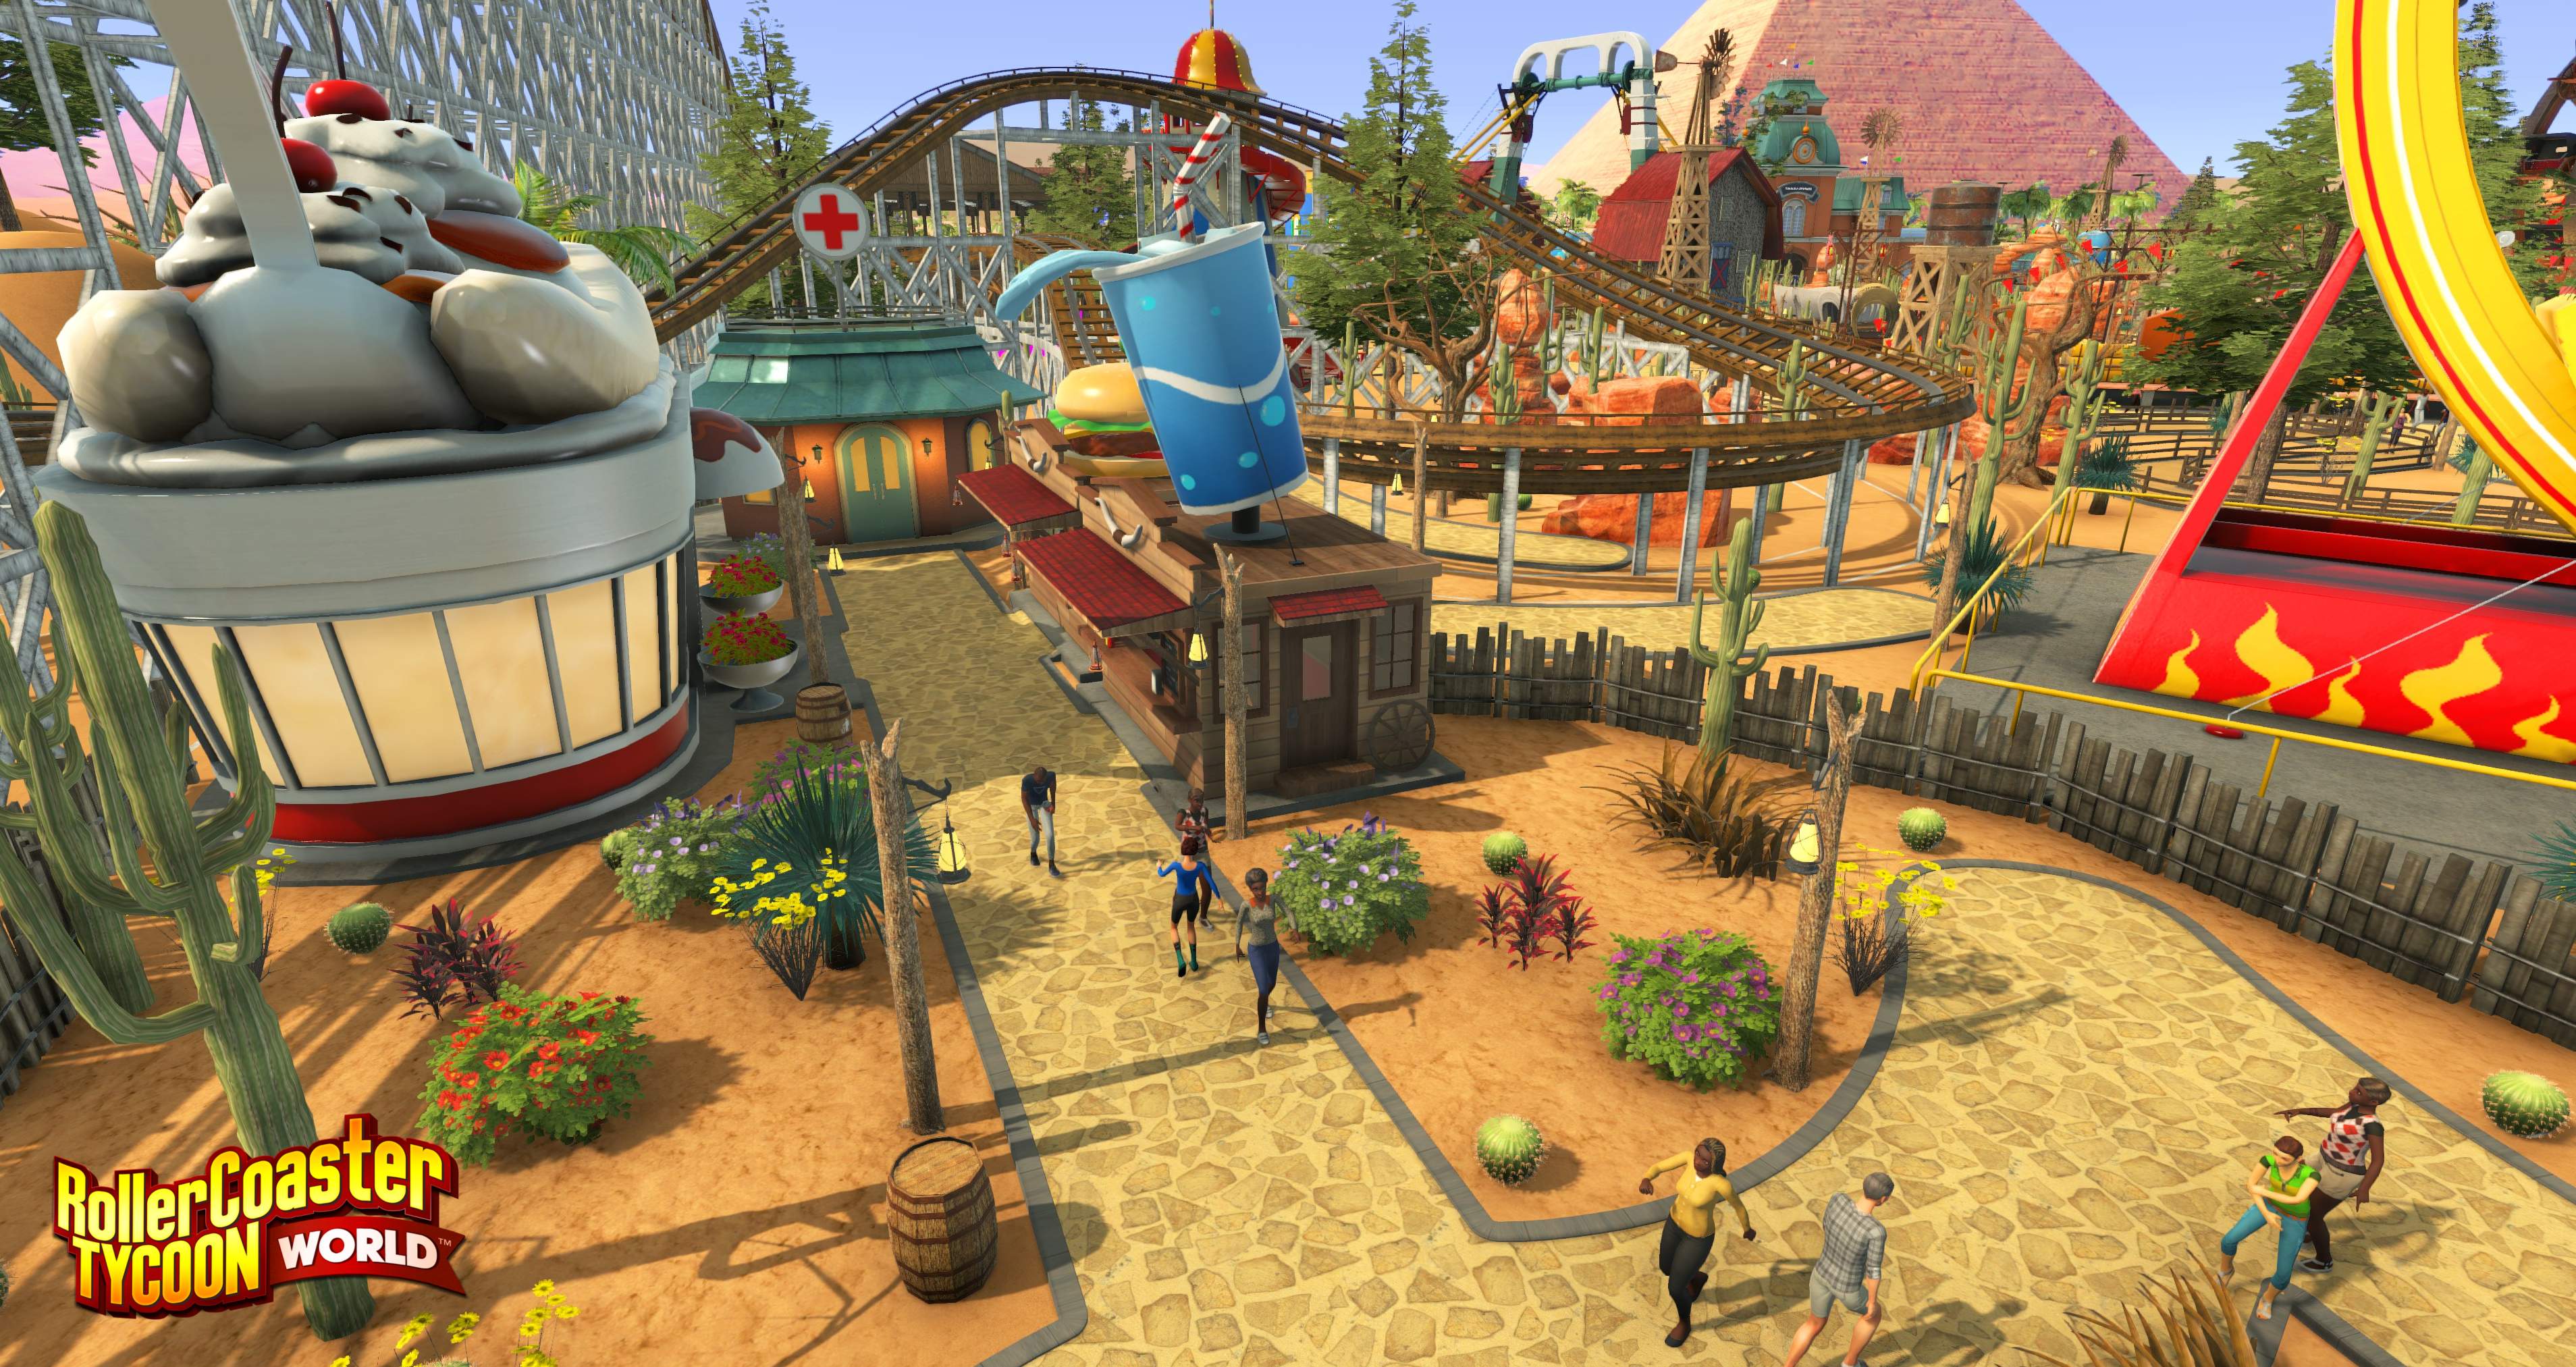 Roller Coaster Tycoon World Patch Download